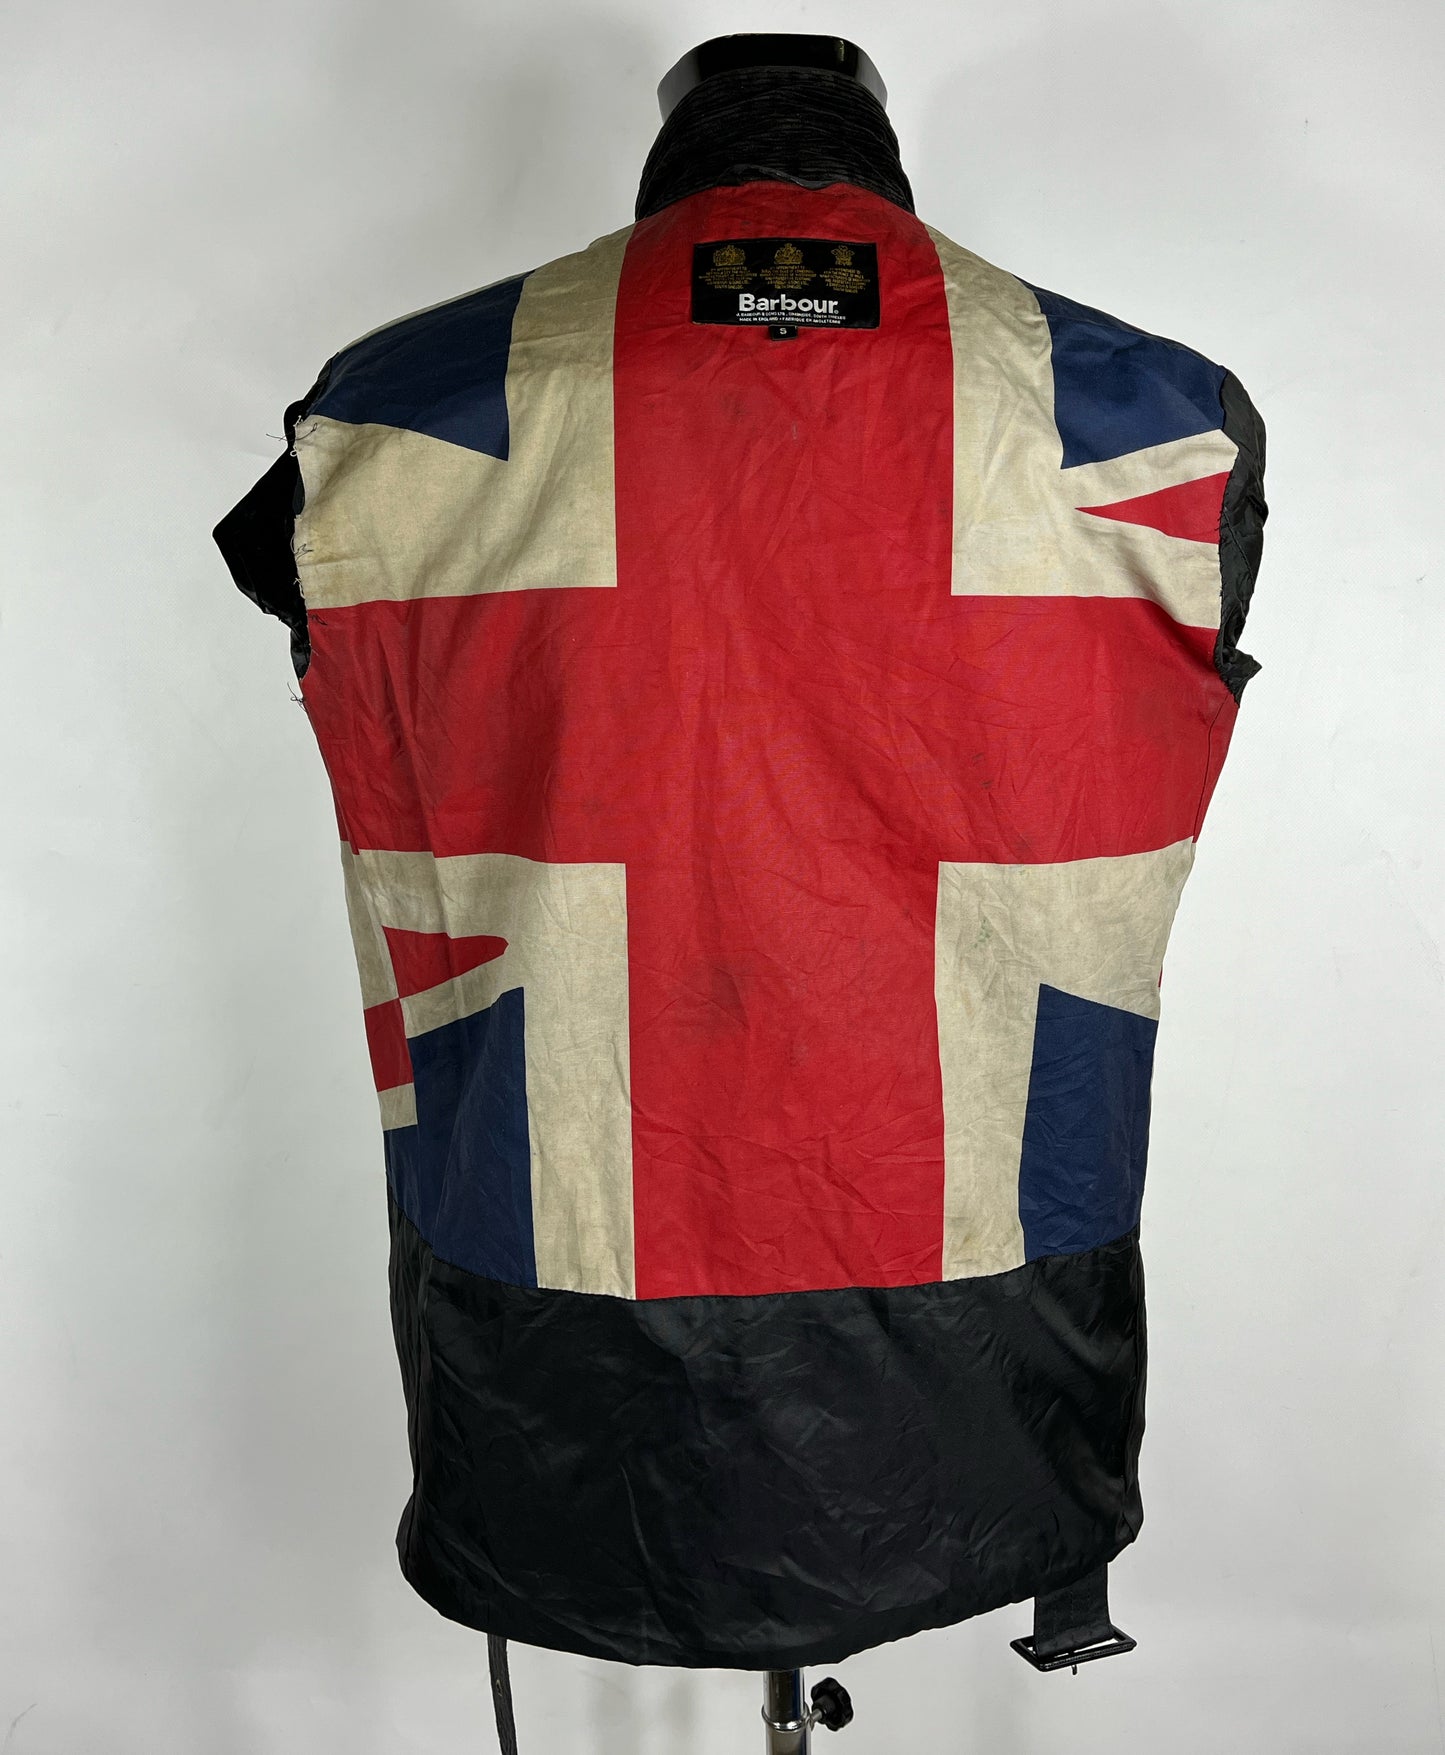 Giacca Barbour International Union Jack Small- Black International Union Jacket Jacket S